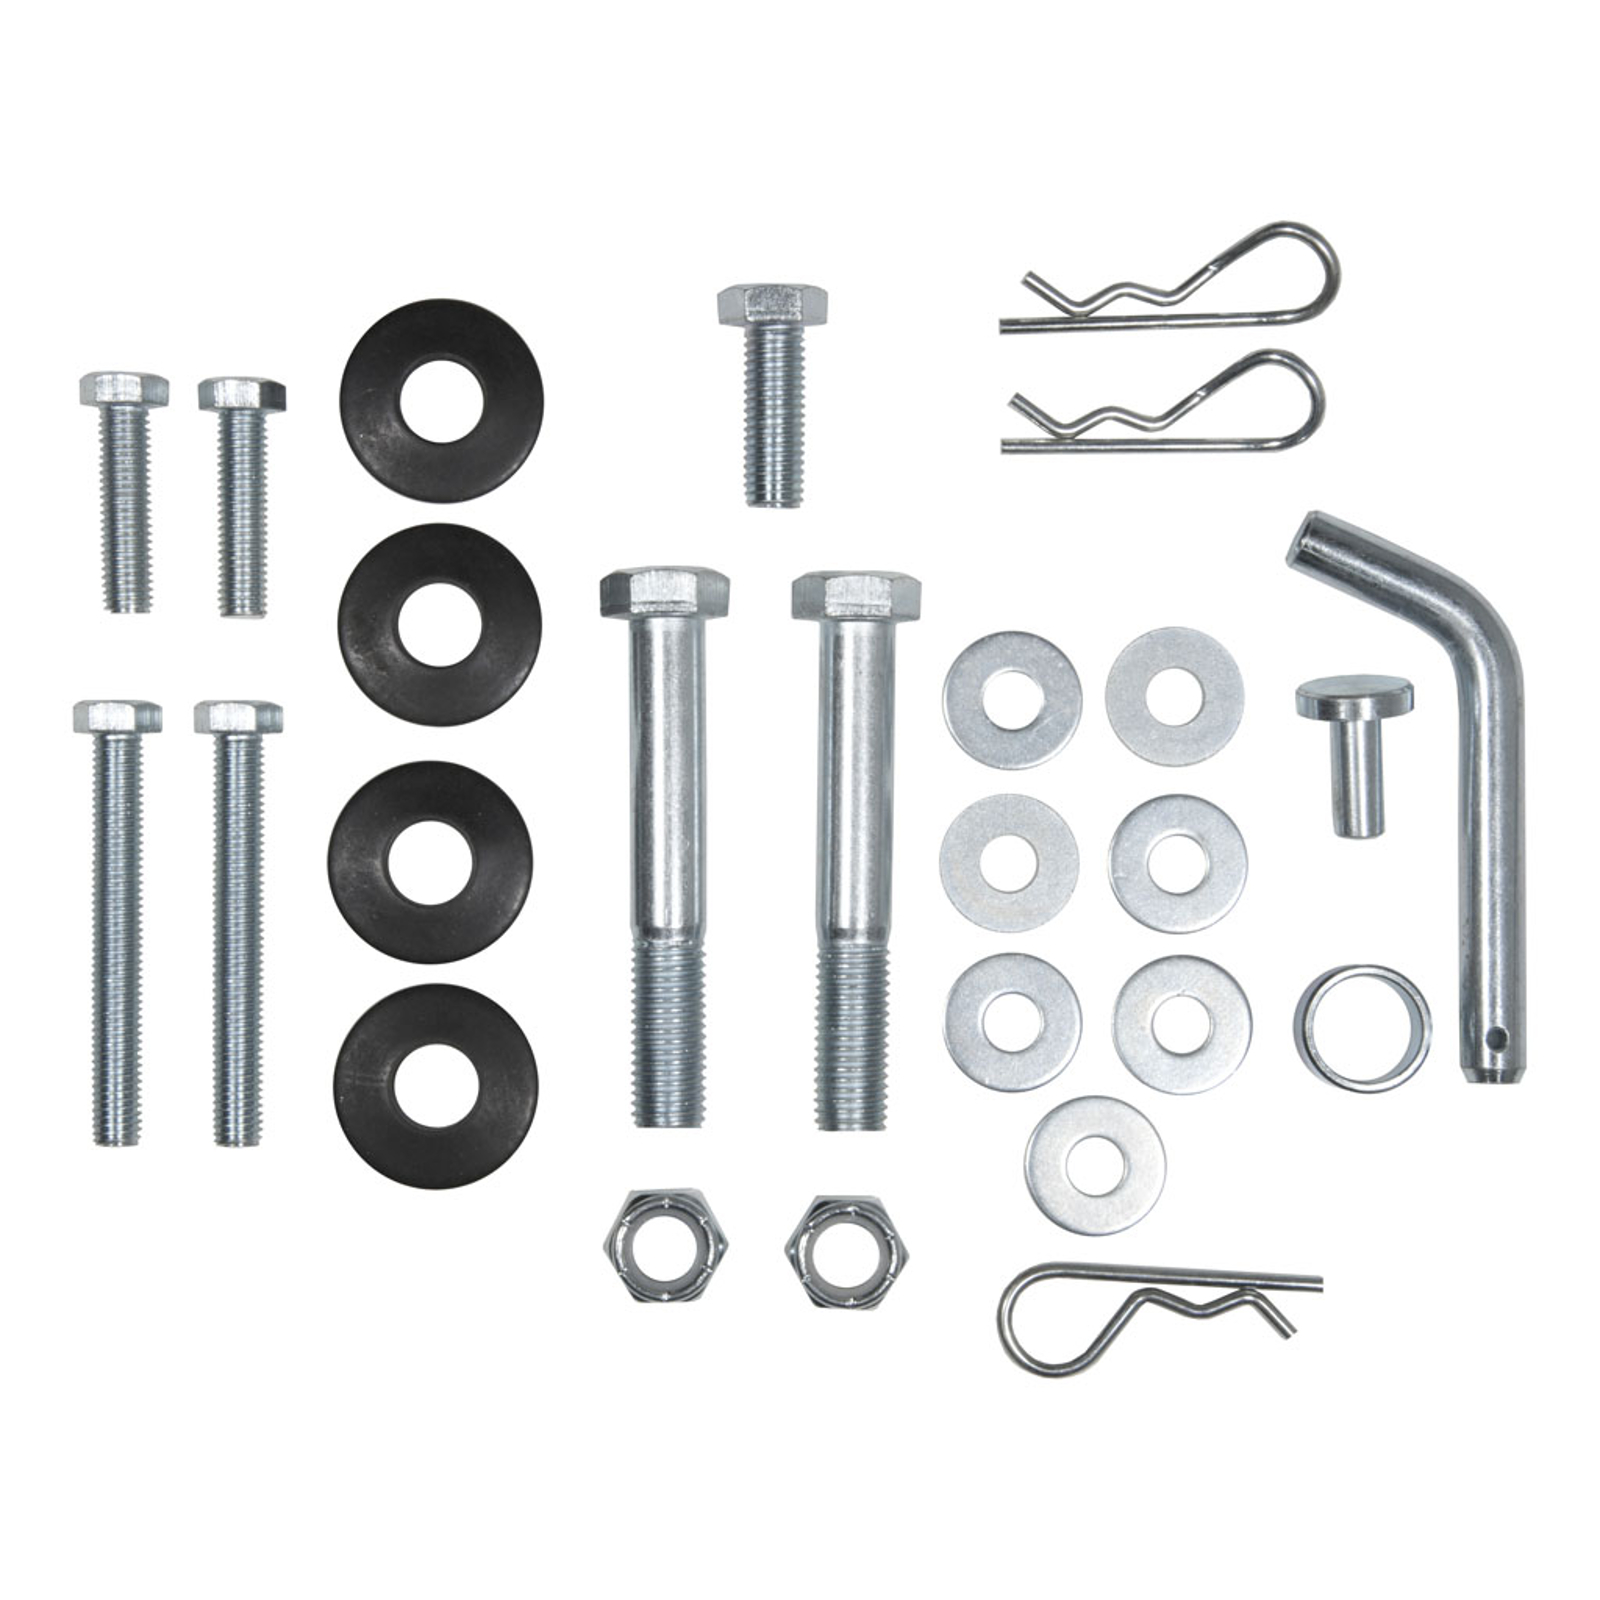 Bolt Kit for Weight Distribution